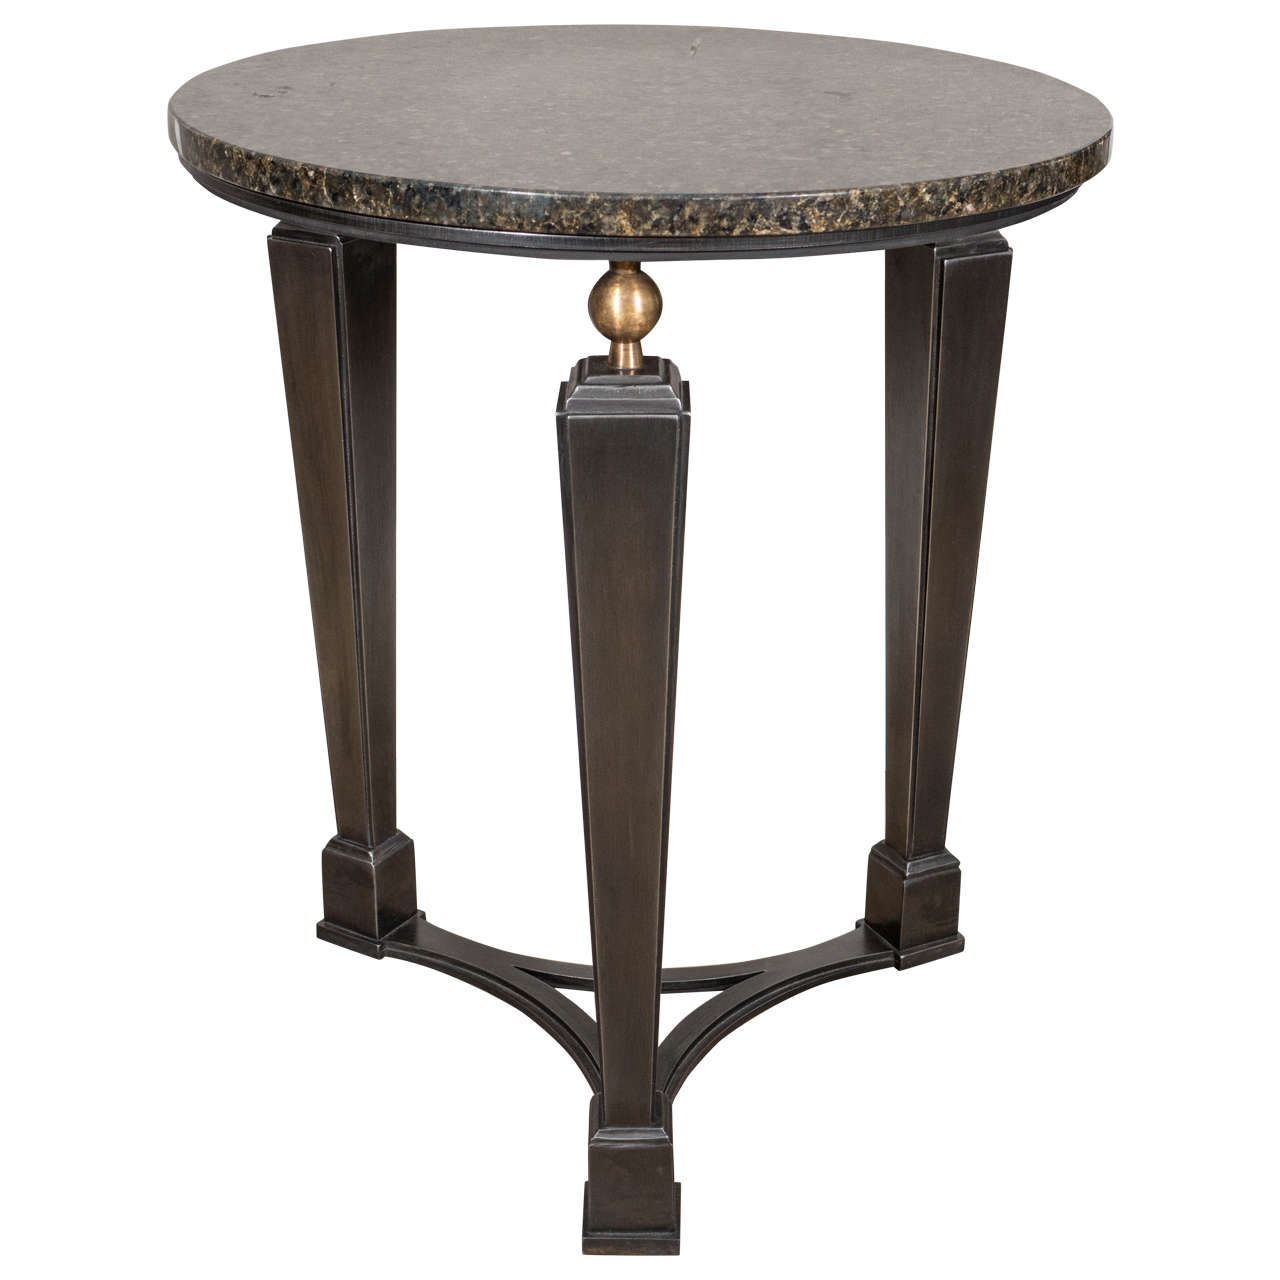 Circular Art Deco Inspired Three Legged Metal Side Table with Bronze Base For Sale